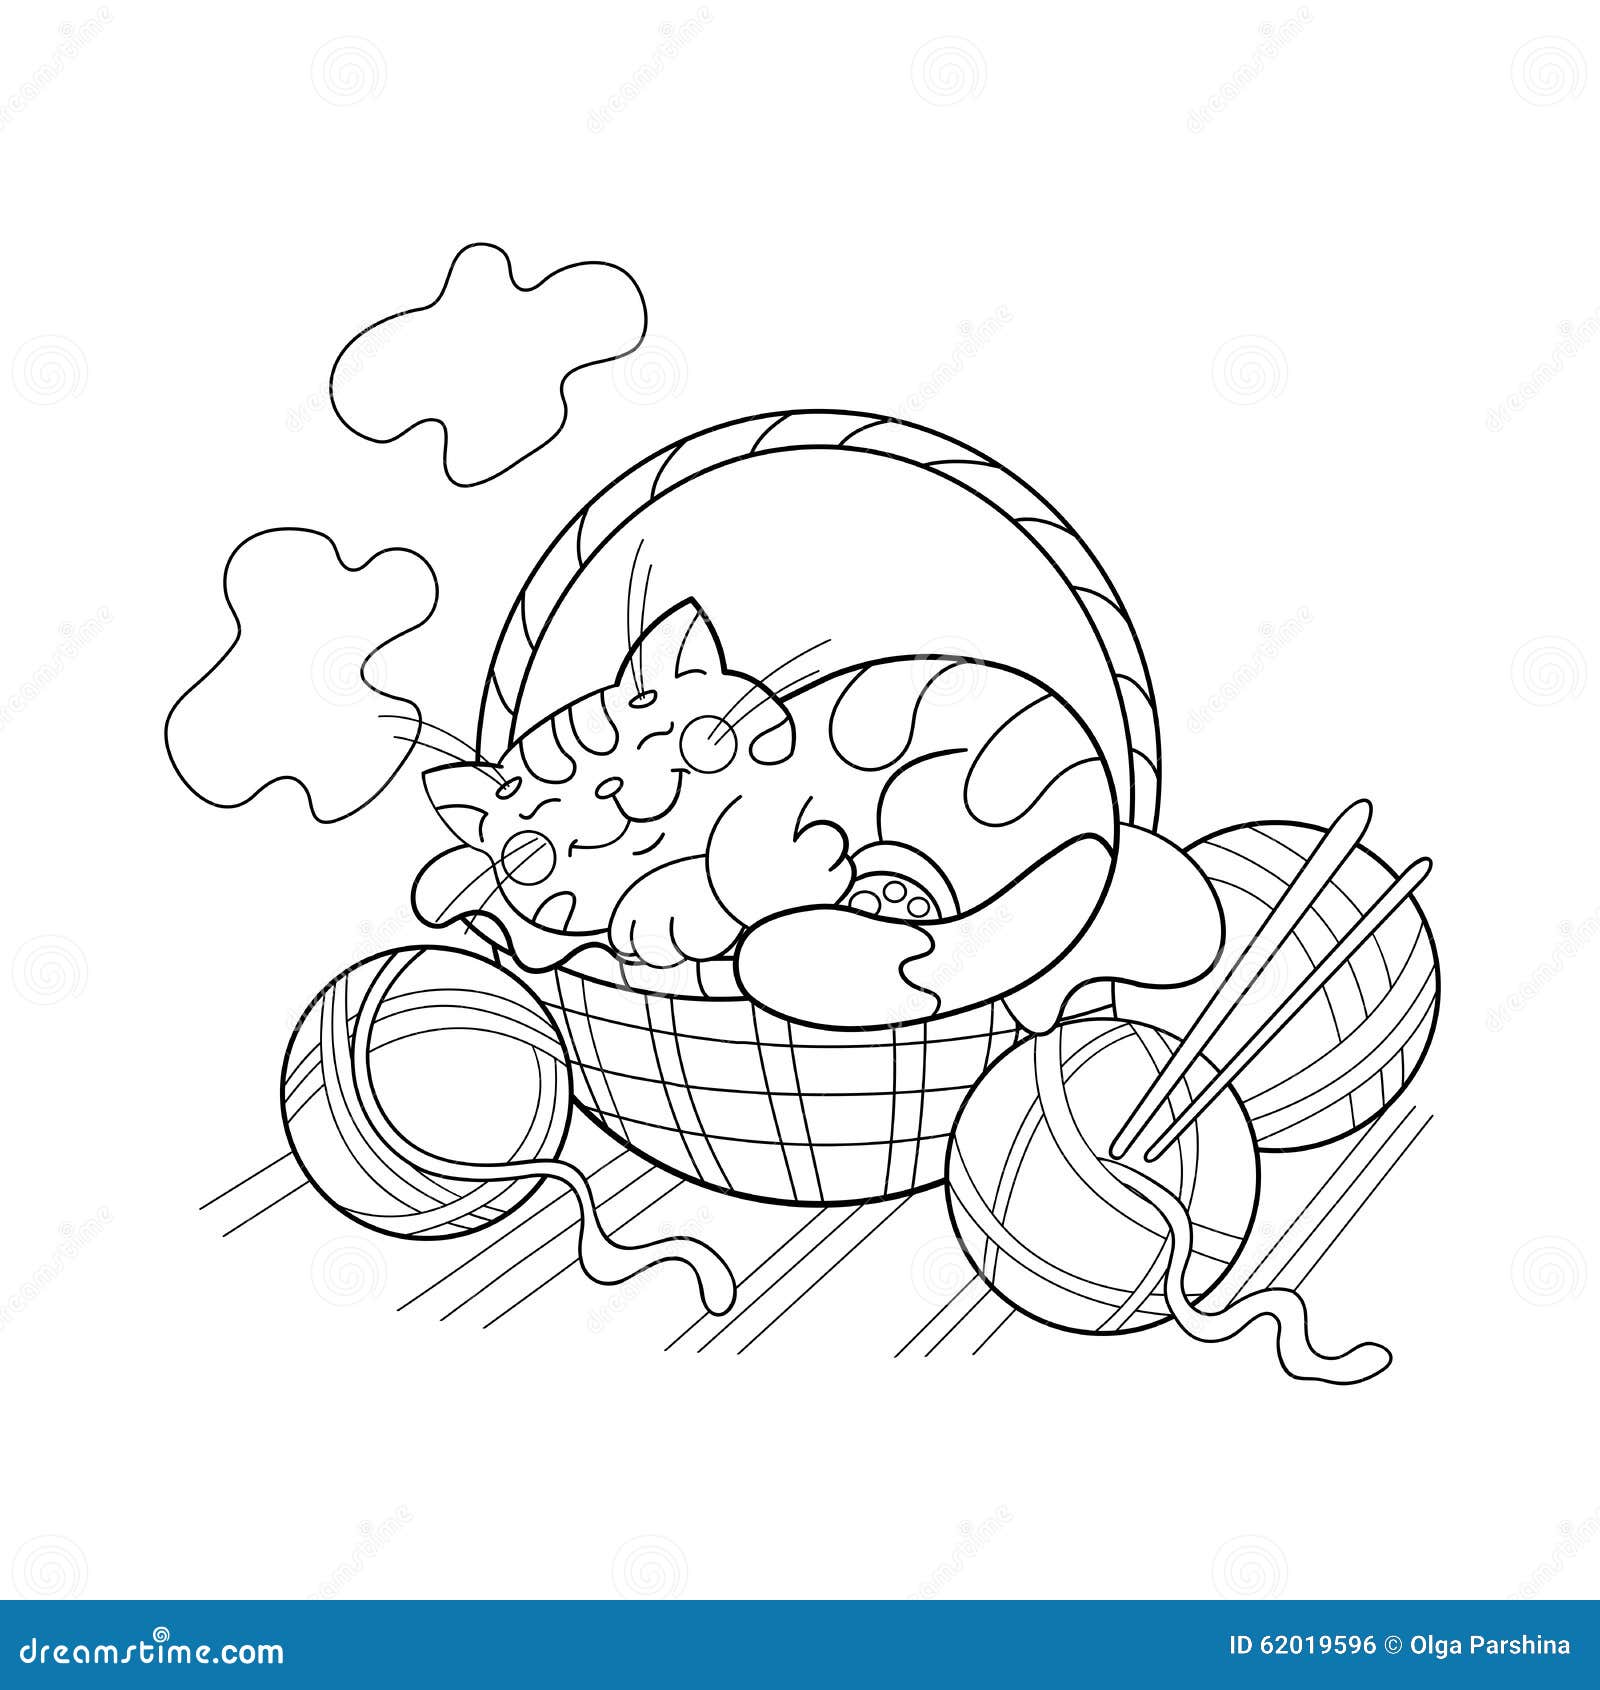 Download Coloring Page Outline Of A Cute Cat Sleeping In A Basket ...